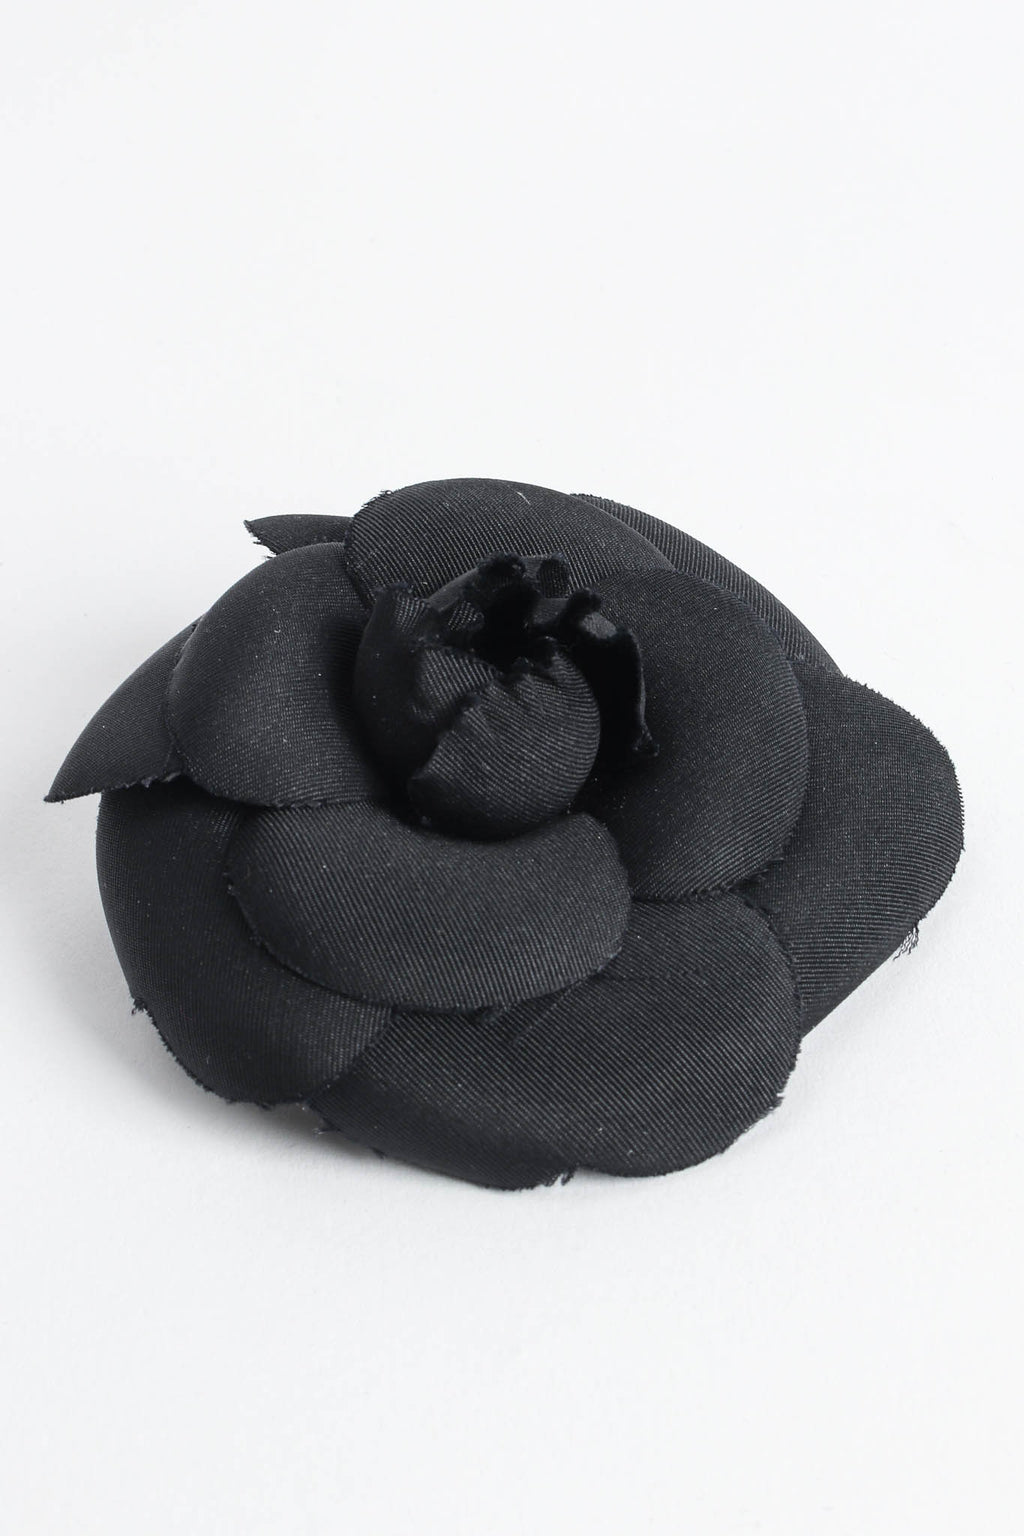 Chanel Camelia Flower Brooch, Black Color, Small Size, no Dust Cover & Box